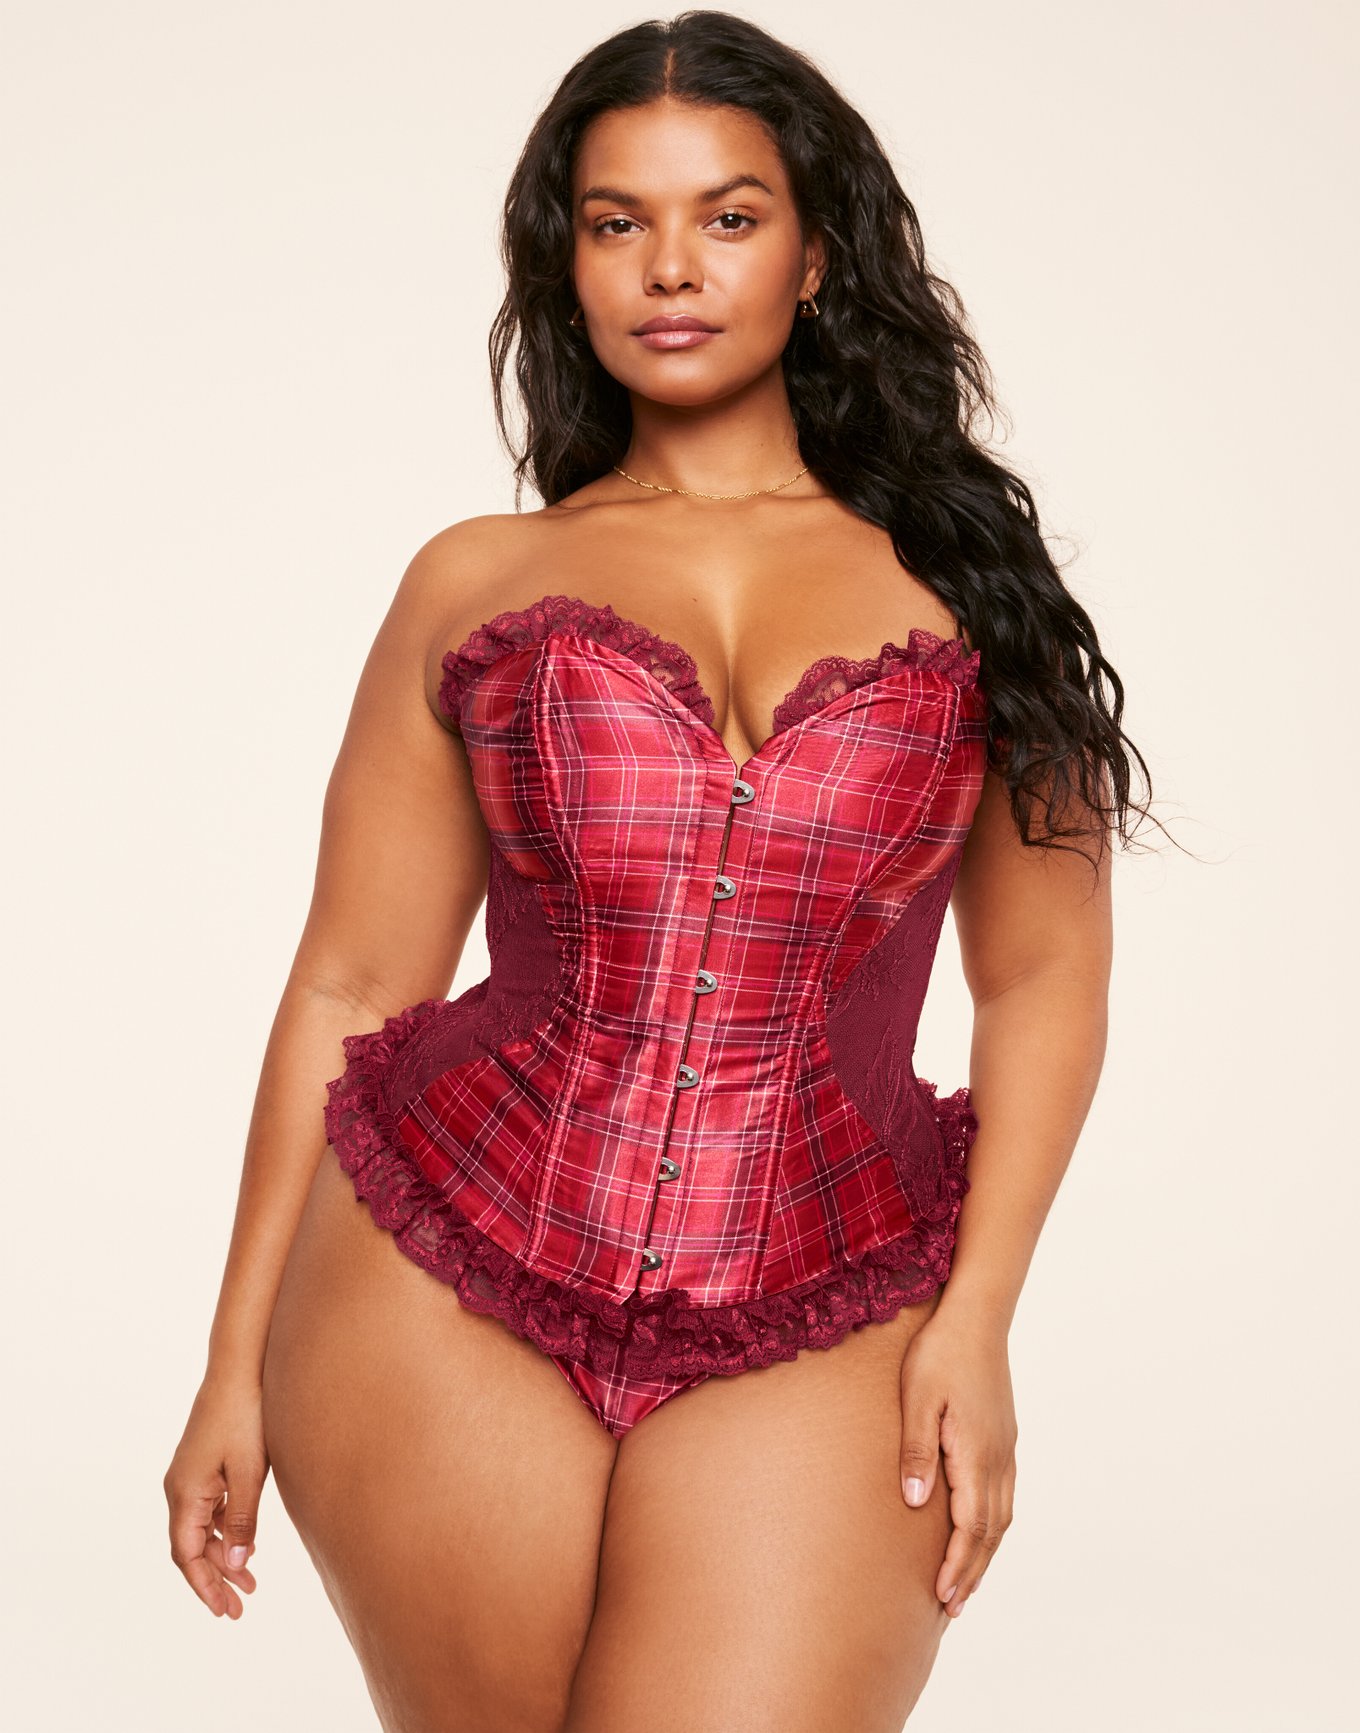 Victoria's Secret Very Sexy Unlined Bustier Bra Small Plaid Red Black Corset